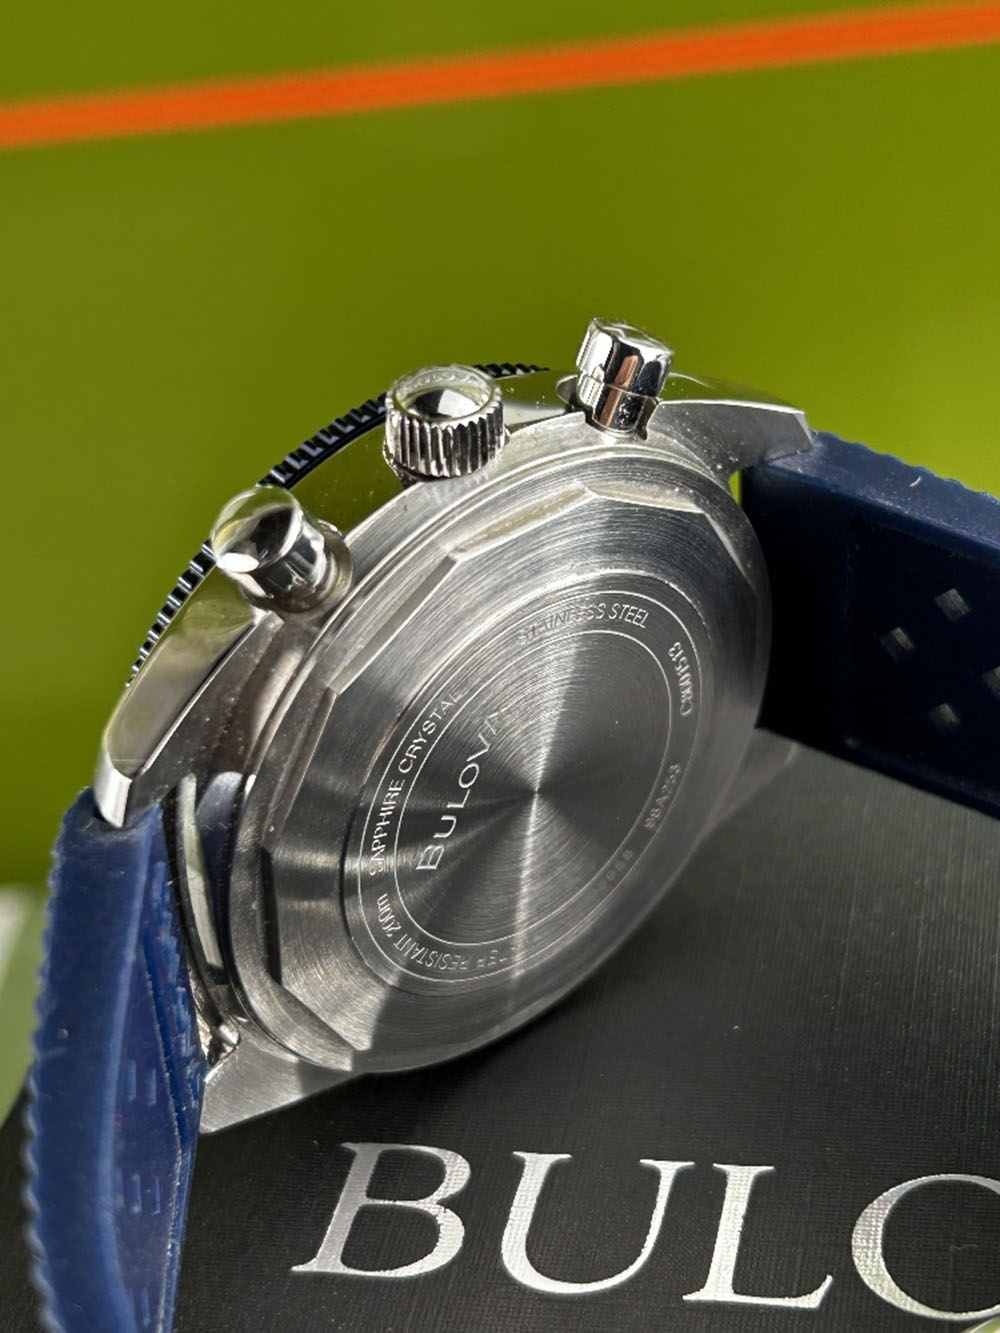 Bulova Archive Series Surfboard Chronograph Watch - Image 3 of 8